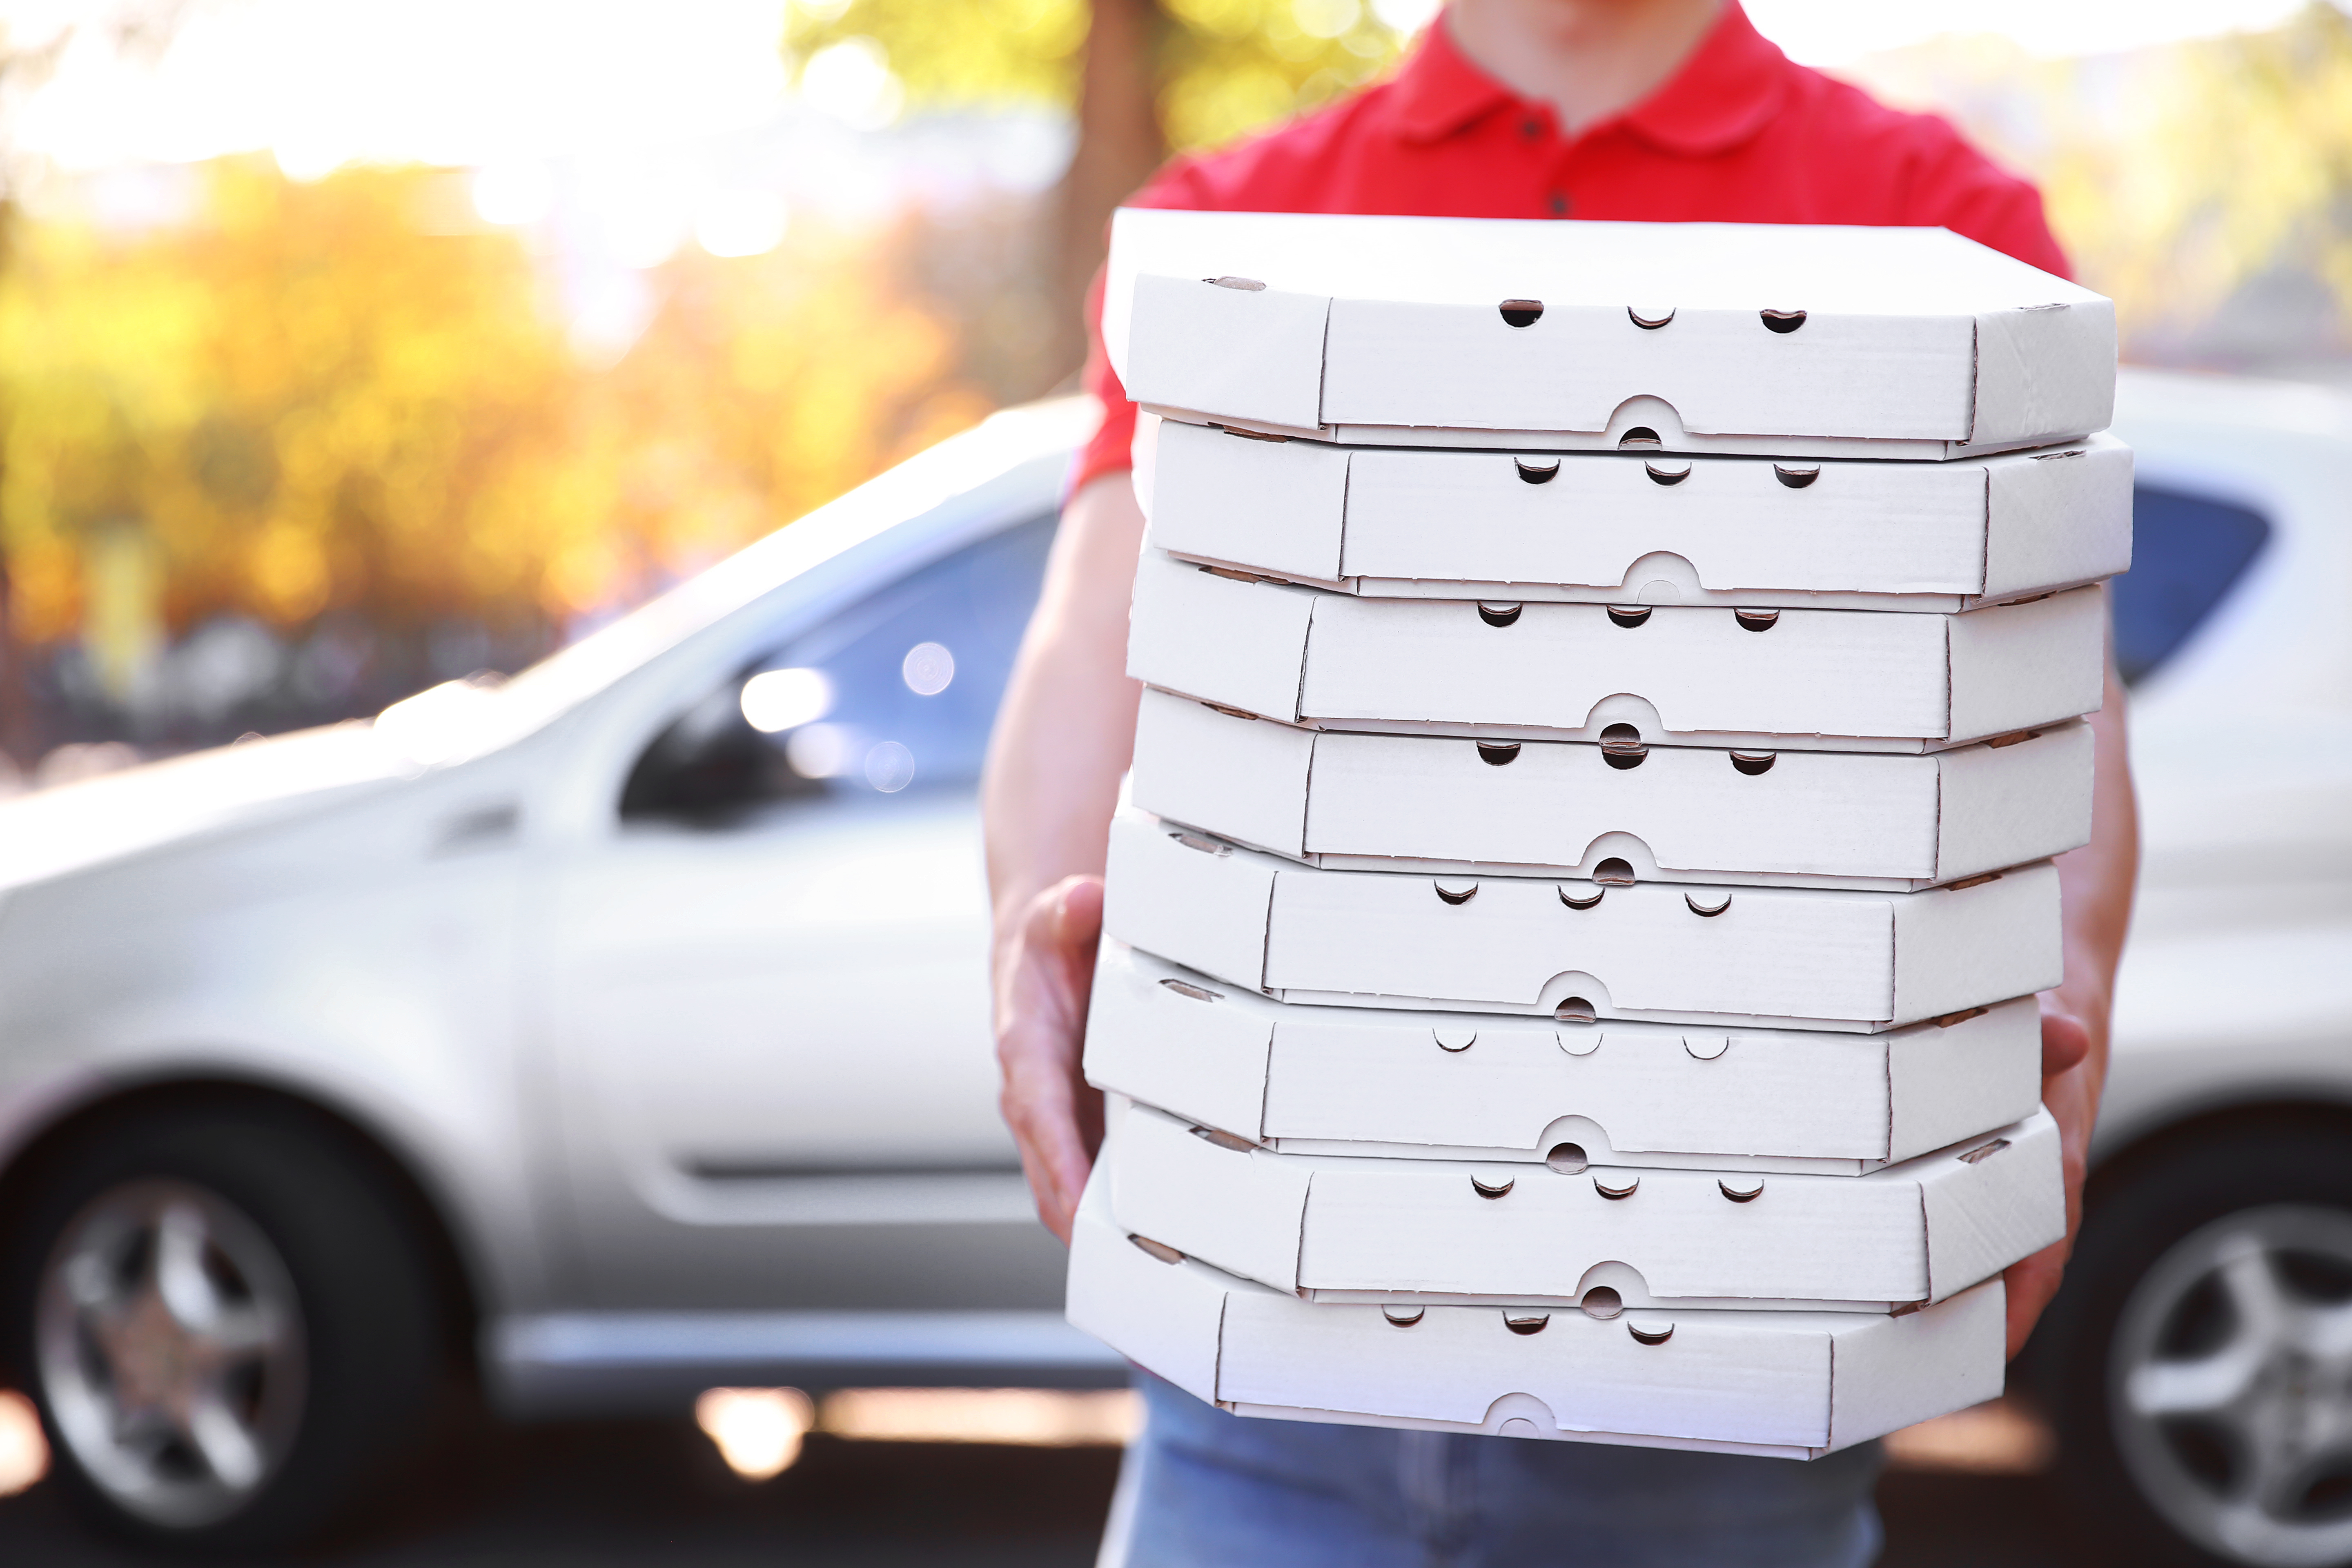 Pizza delivery man holding pizza